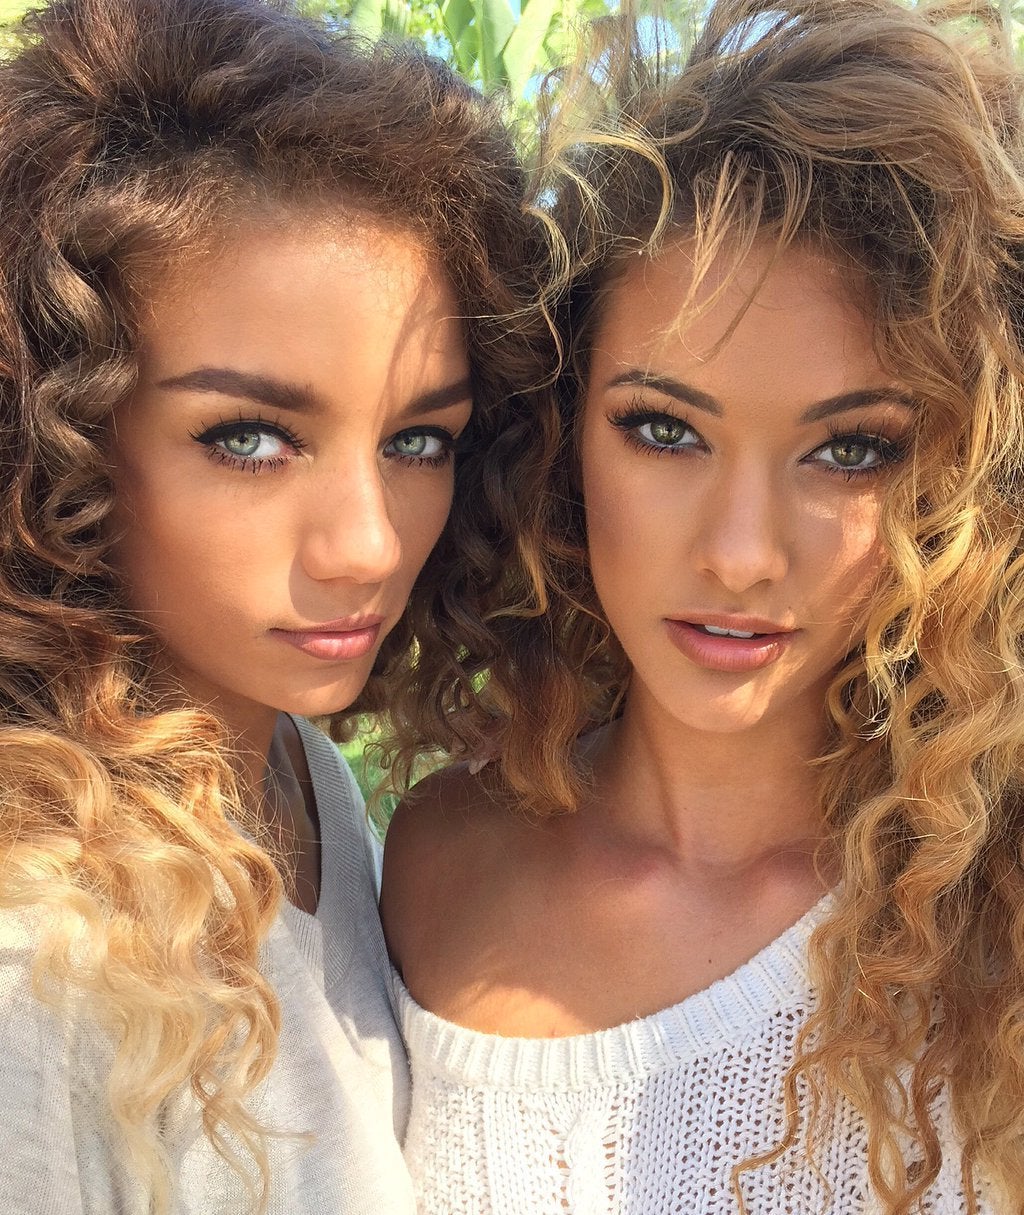 Lolo Wood who is hot is posing in her underwear with IG model Jena Frumes.&...